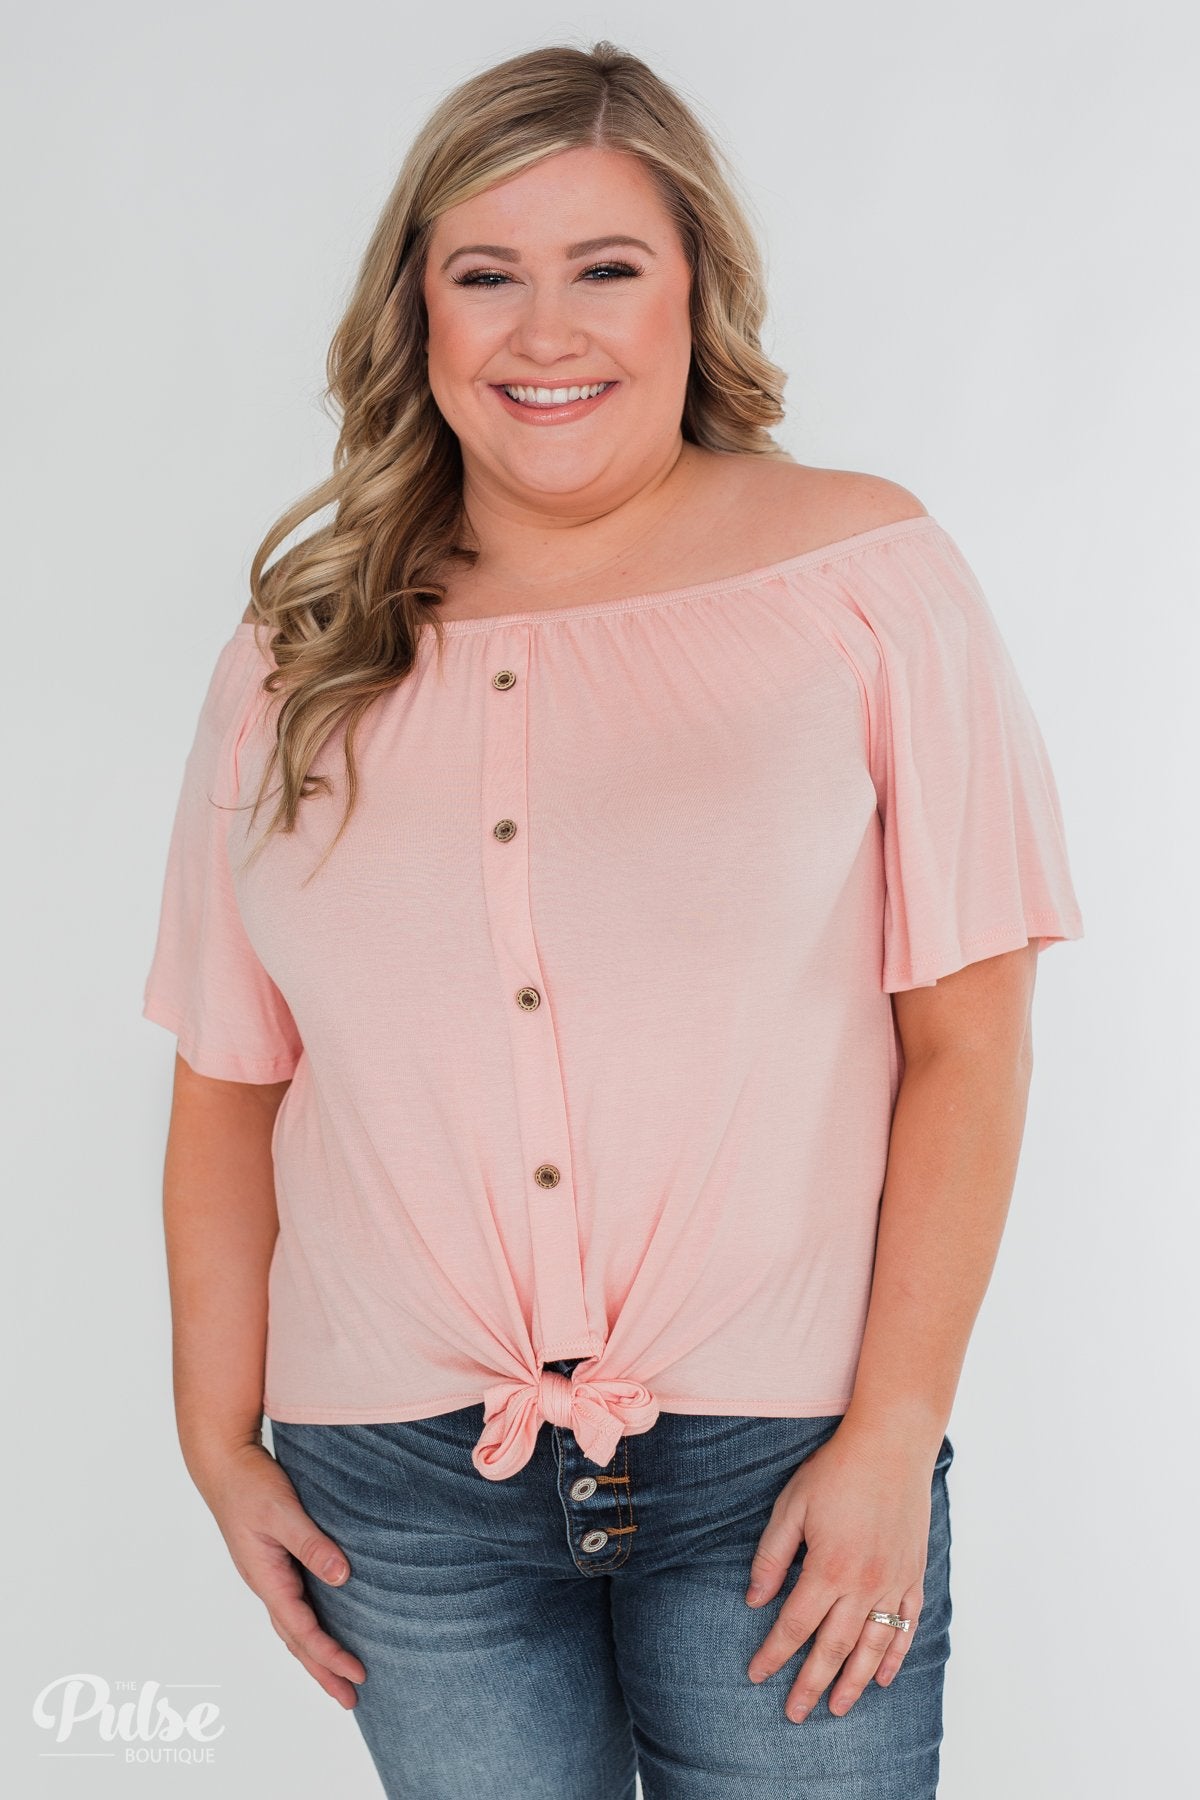 Follow Your Lead Off the Shoulder Top- Blush